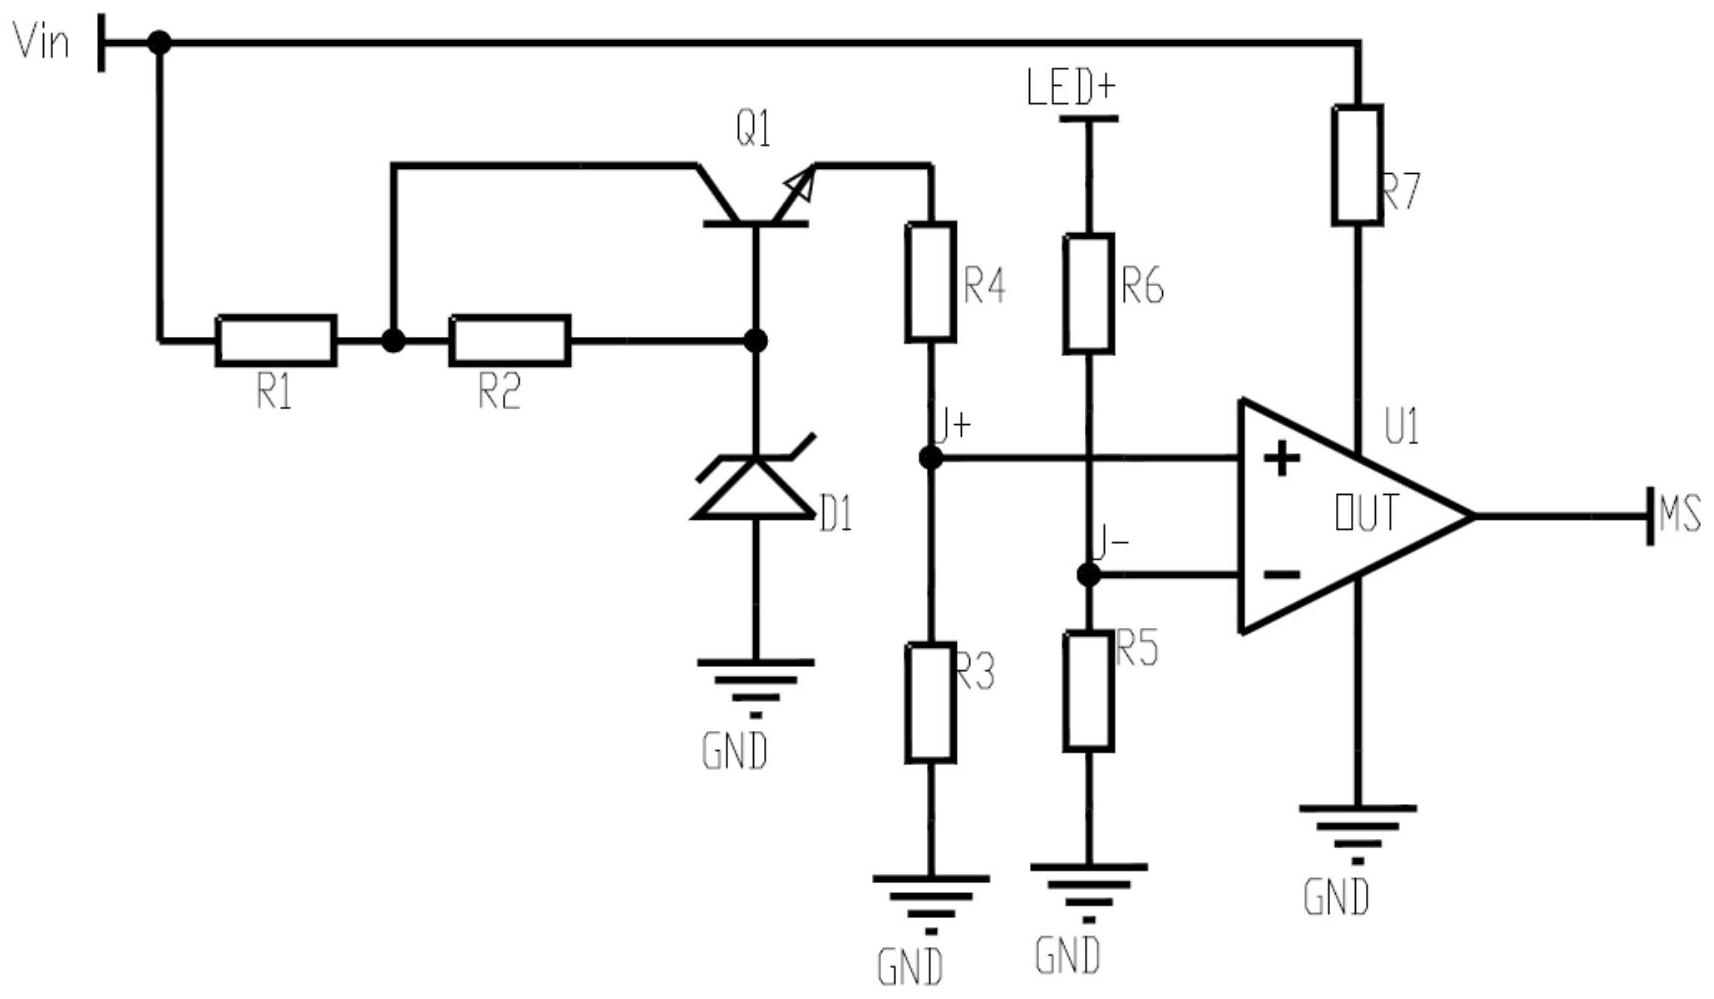 XINGYU CO., LTD has obtained a patent for a single string LED short circuit detection feedback circuit in a switching power supply, which can realize the design of car lighting circuits